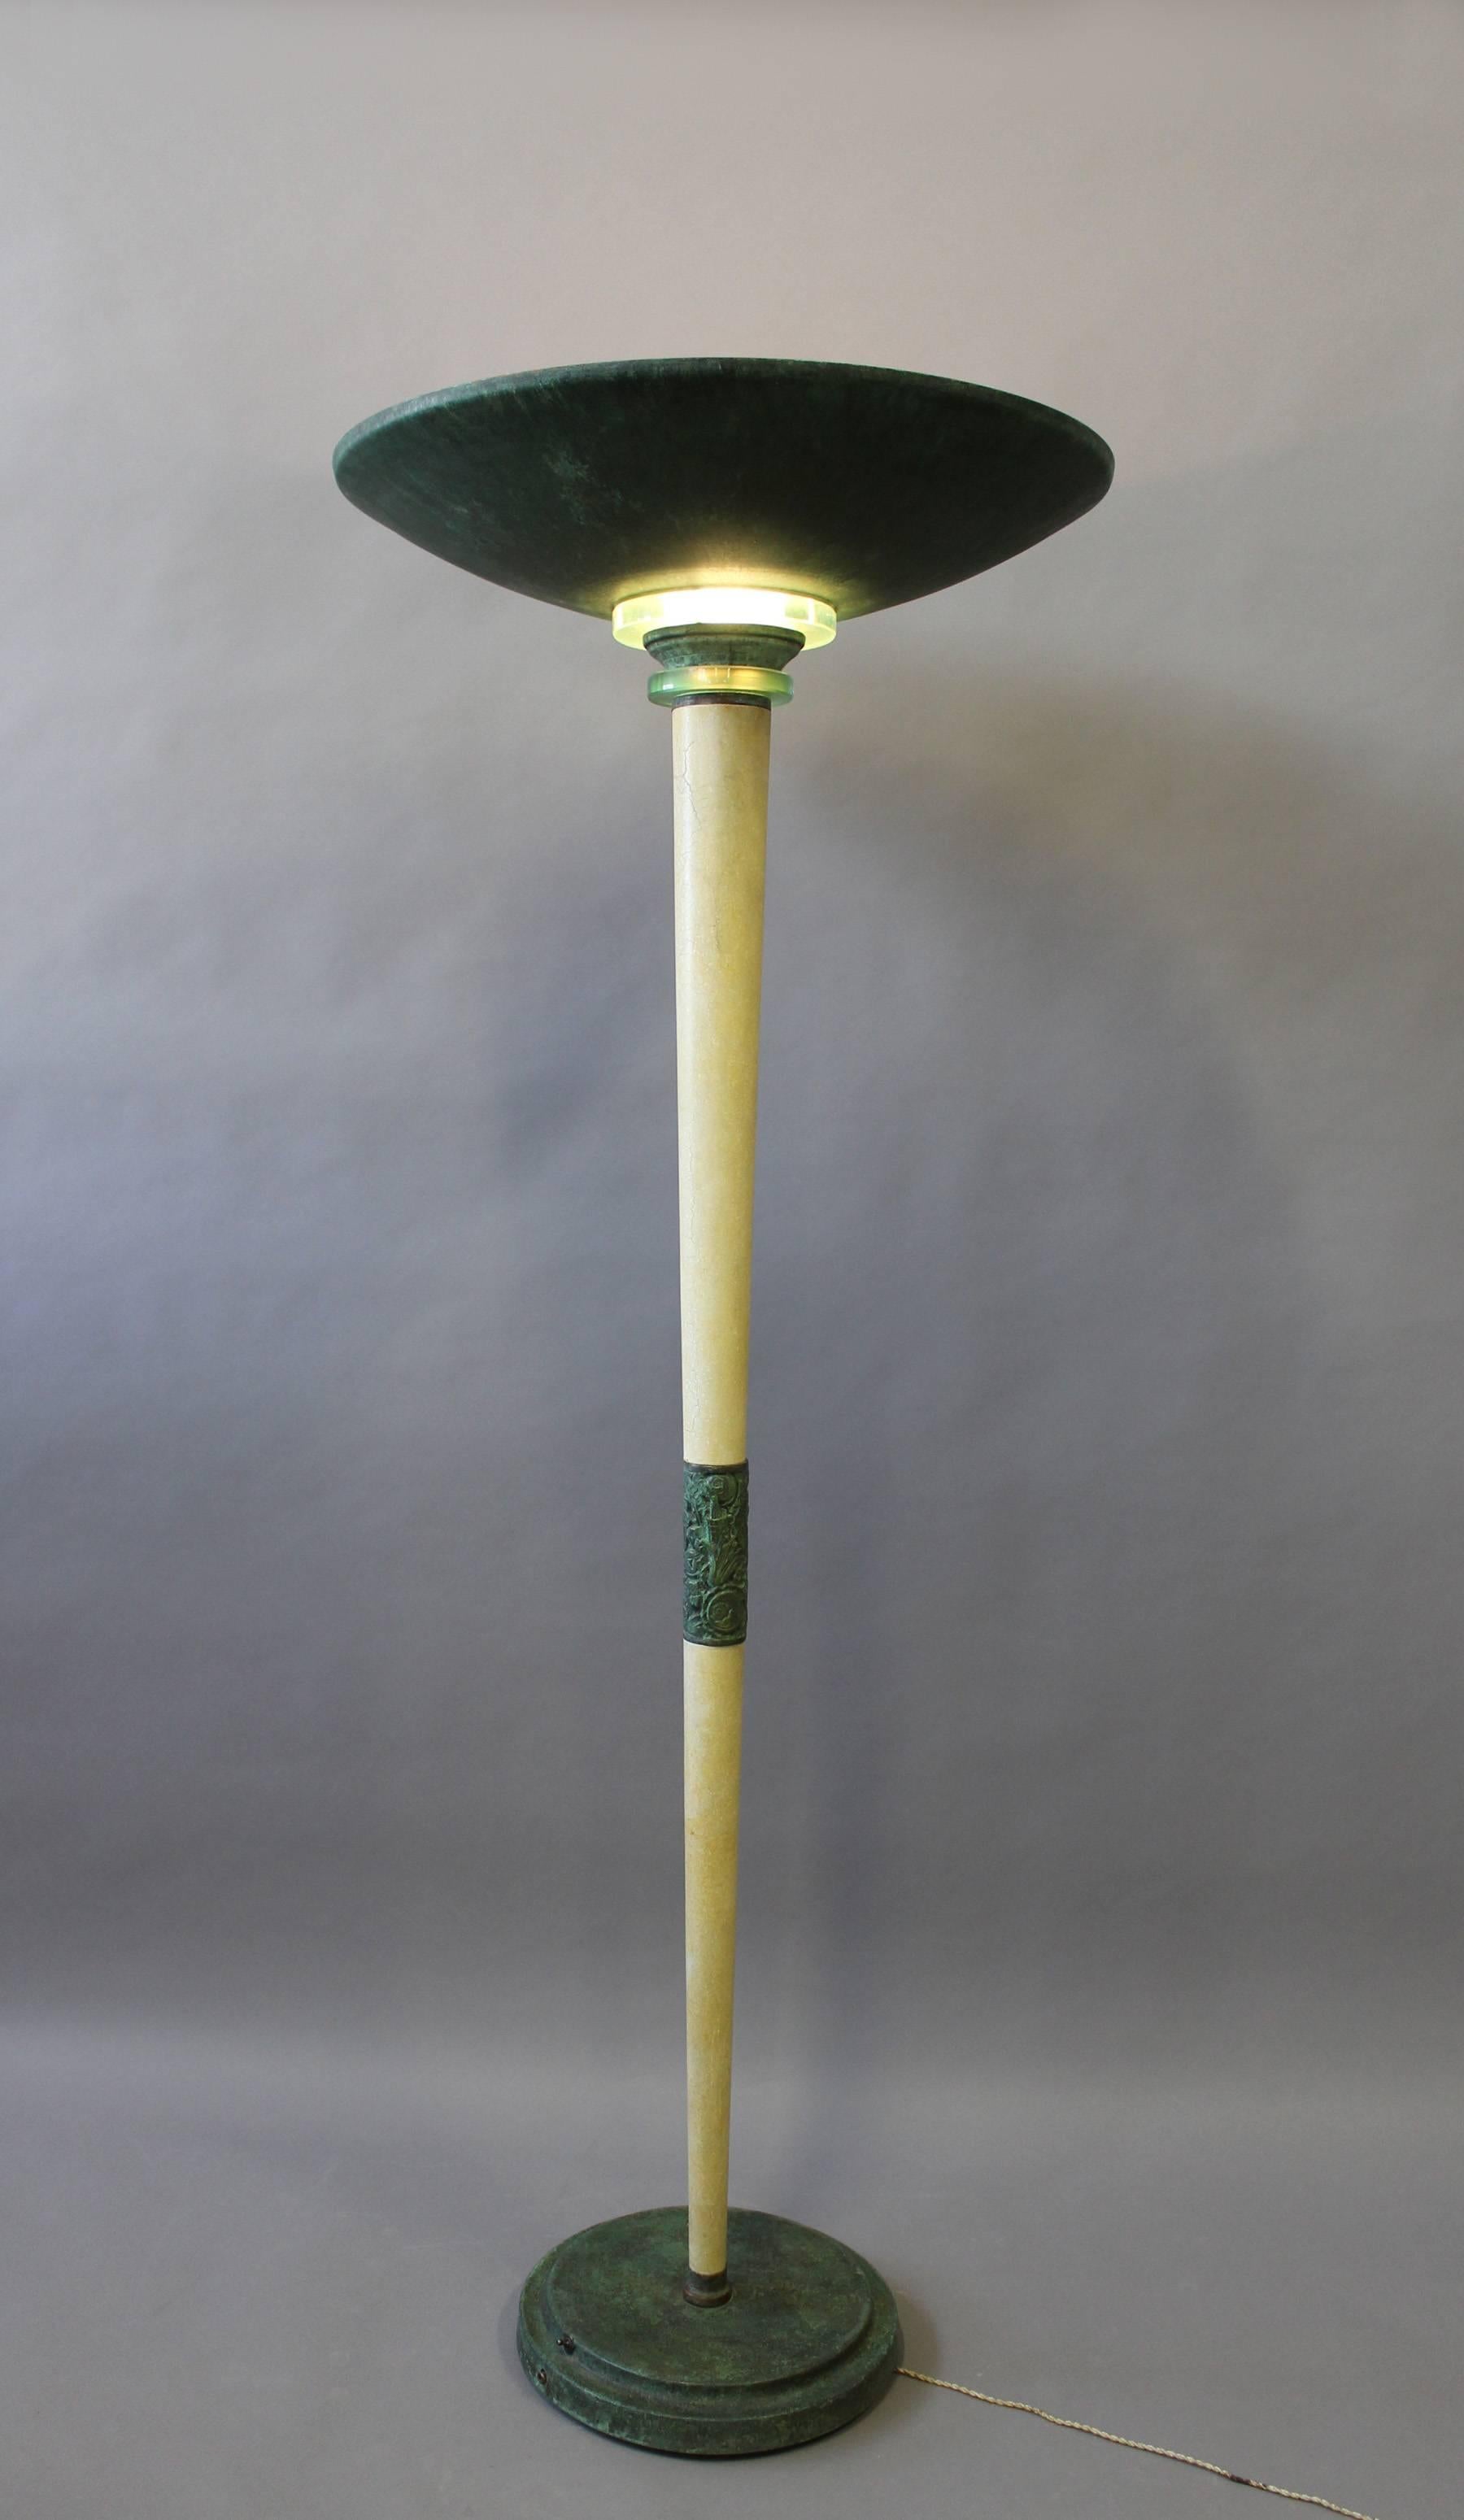 A Large Fine French Art Deco Patina-ed Wood and Metal Floor Lamp For Sale 6